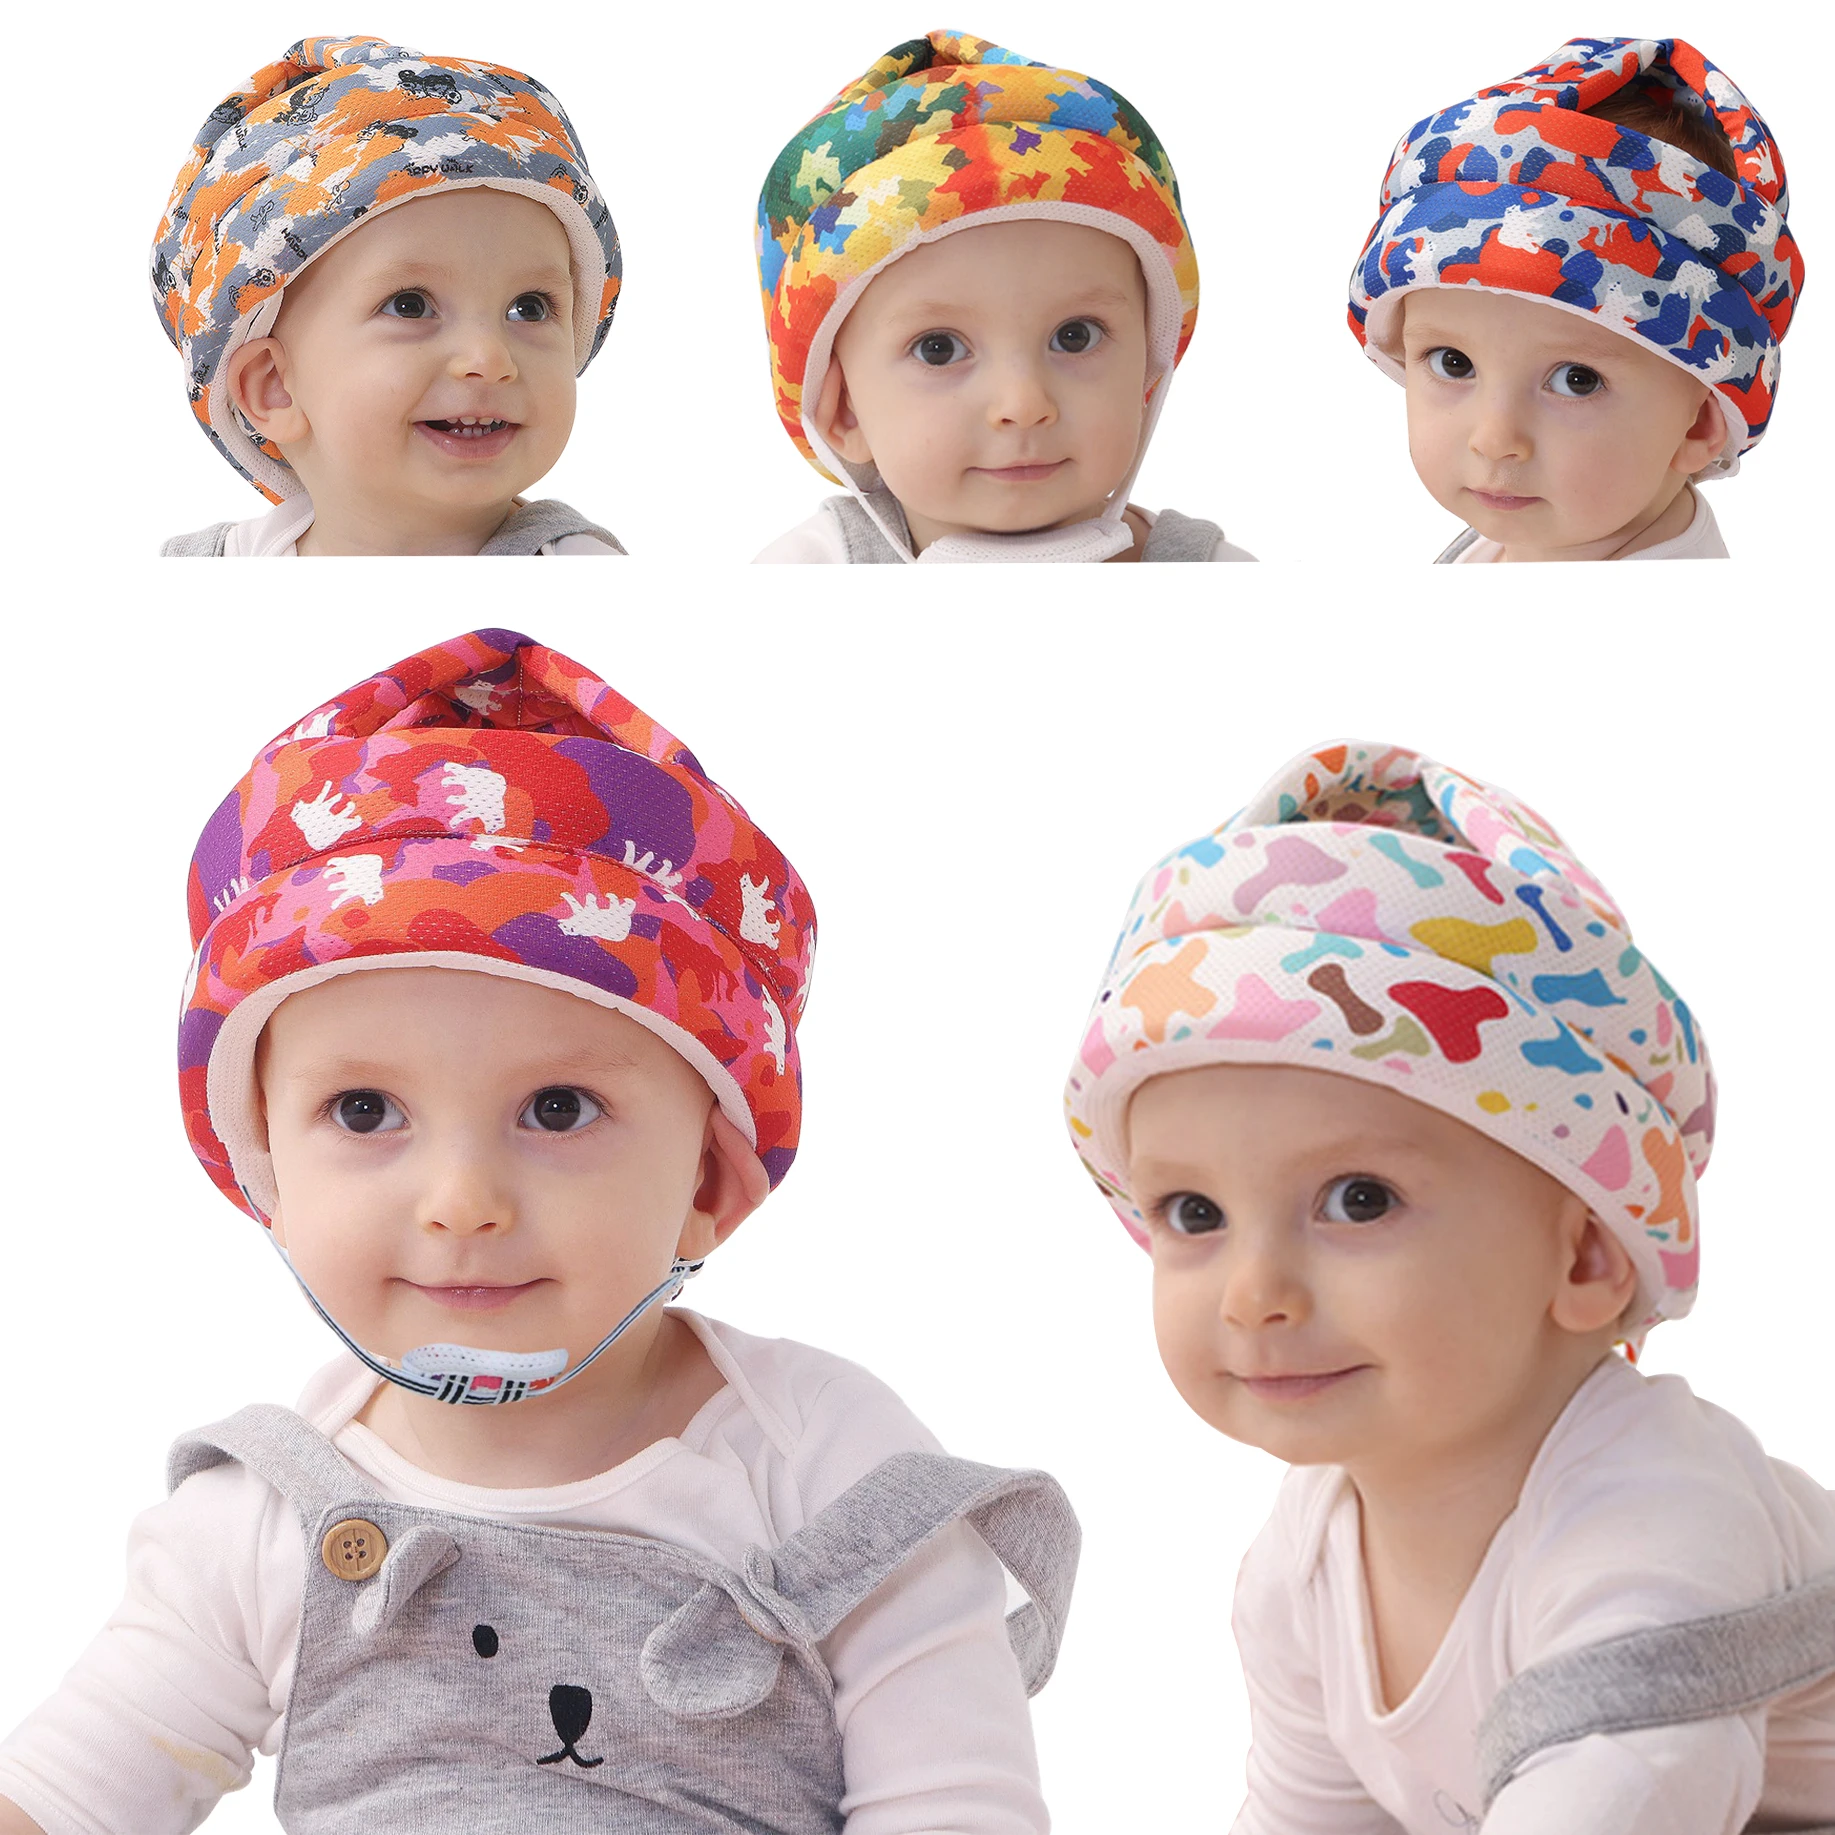 Toddler Baby Head Protection Cartoon Pillow Safety Infant Anti-fall Soft Cotton Children Protective Cushion Baby Safe Care Cap